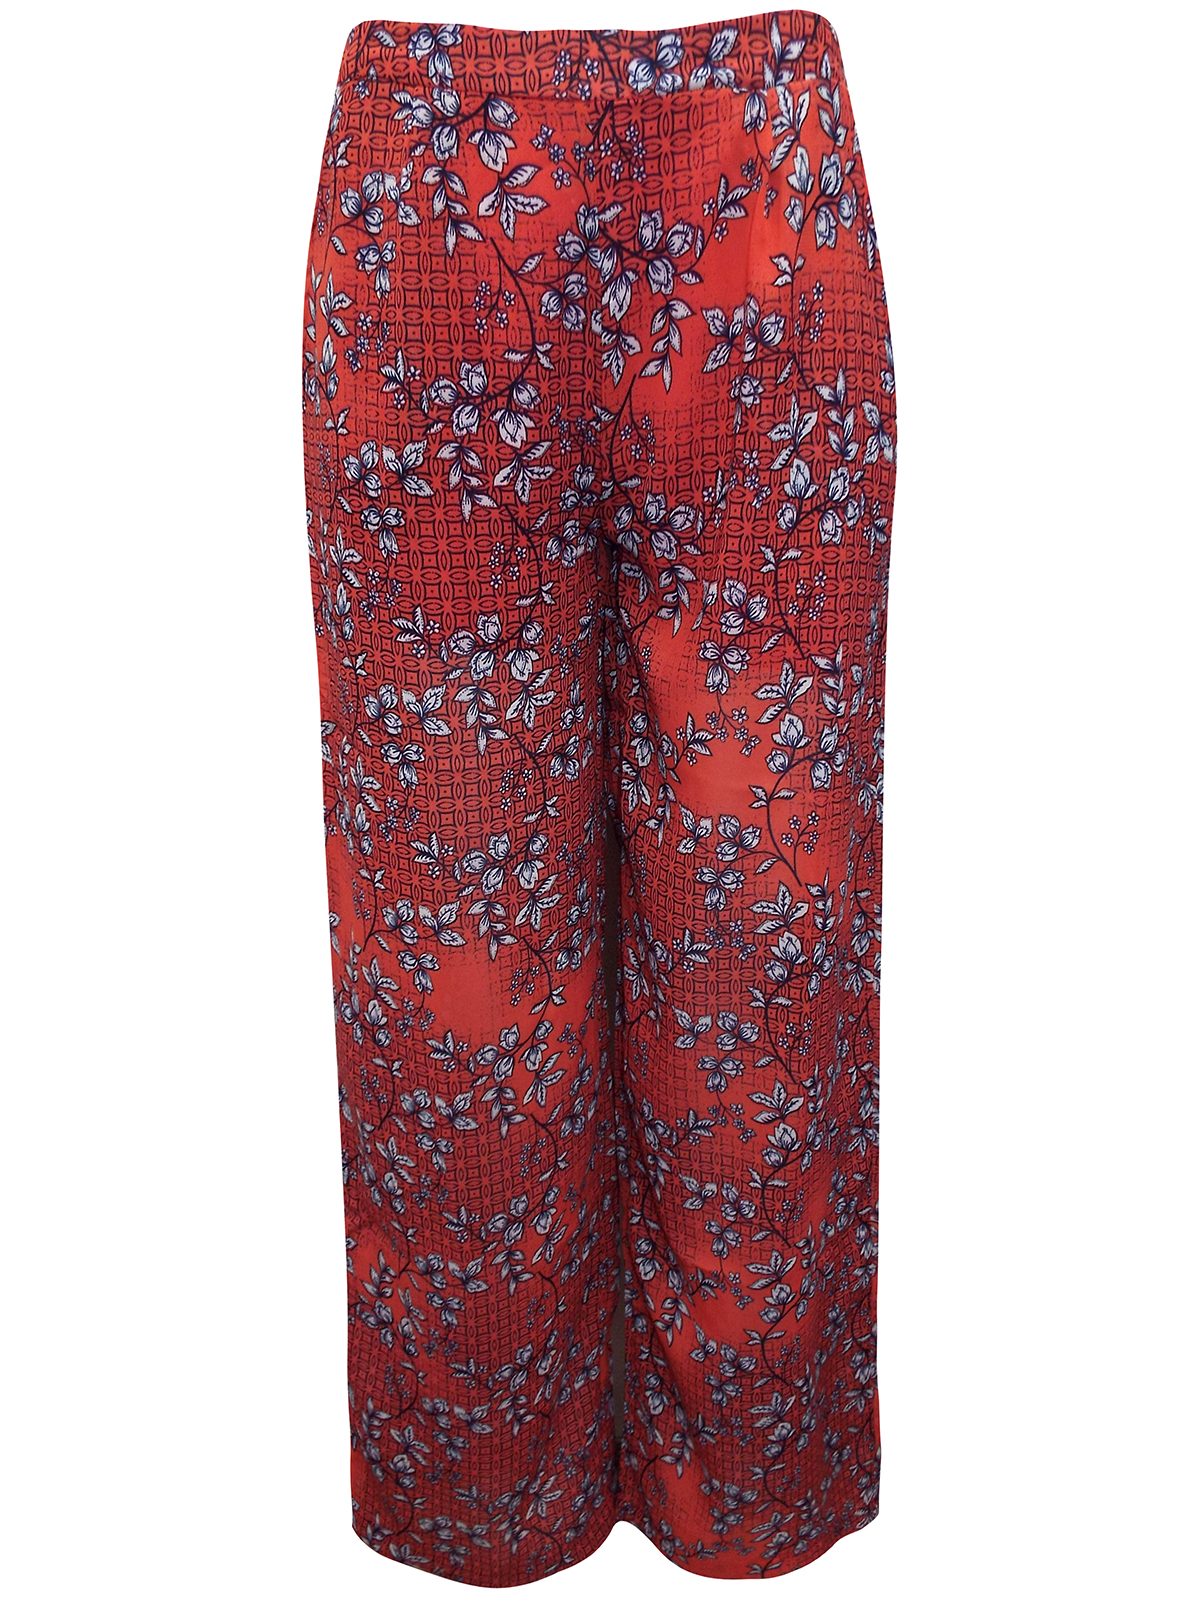 RUST Floral Print Chiffon Trousers - Plus Size 14 to 18